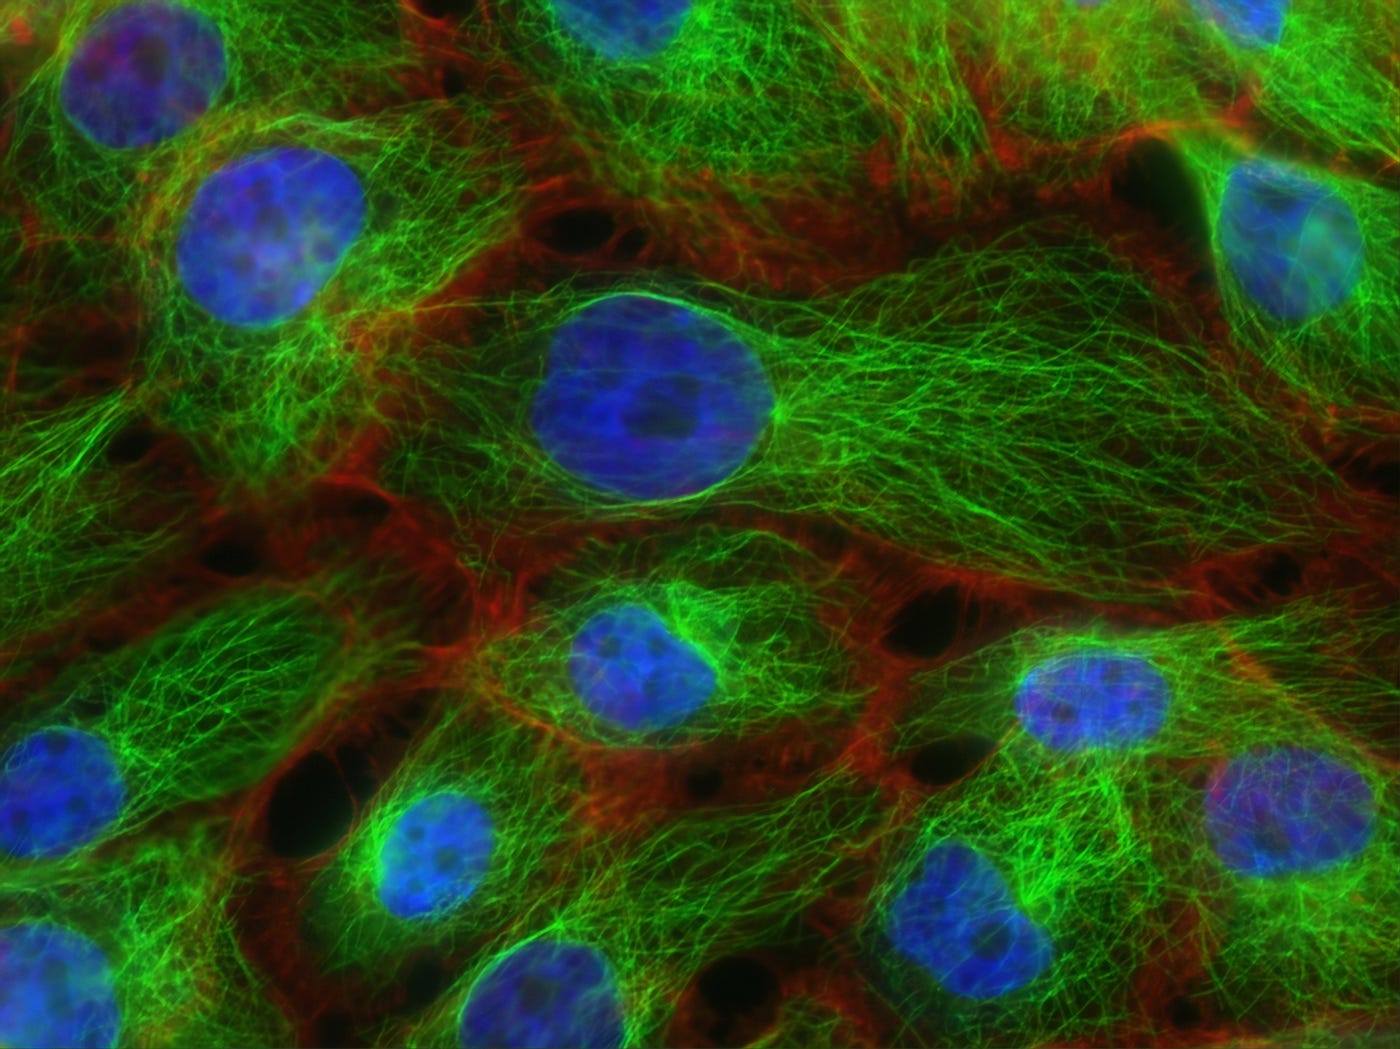 Photomicrograph of breast cancer cells. The cell body is blue with surrounding tissue fluorescent green.